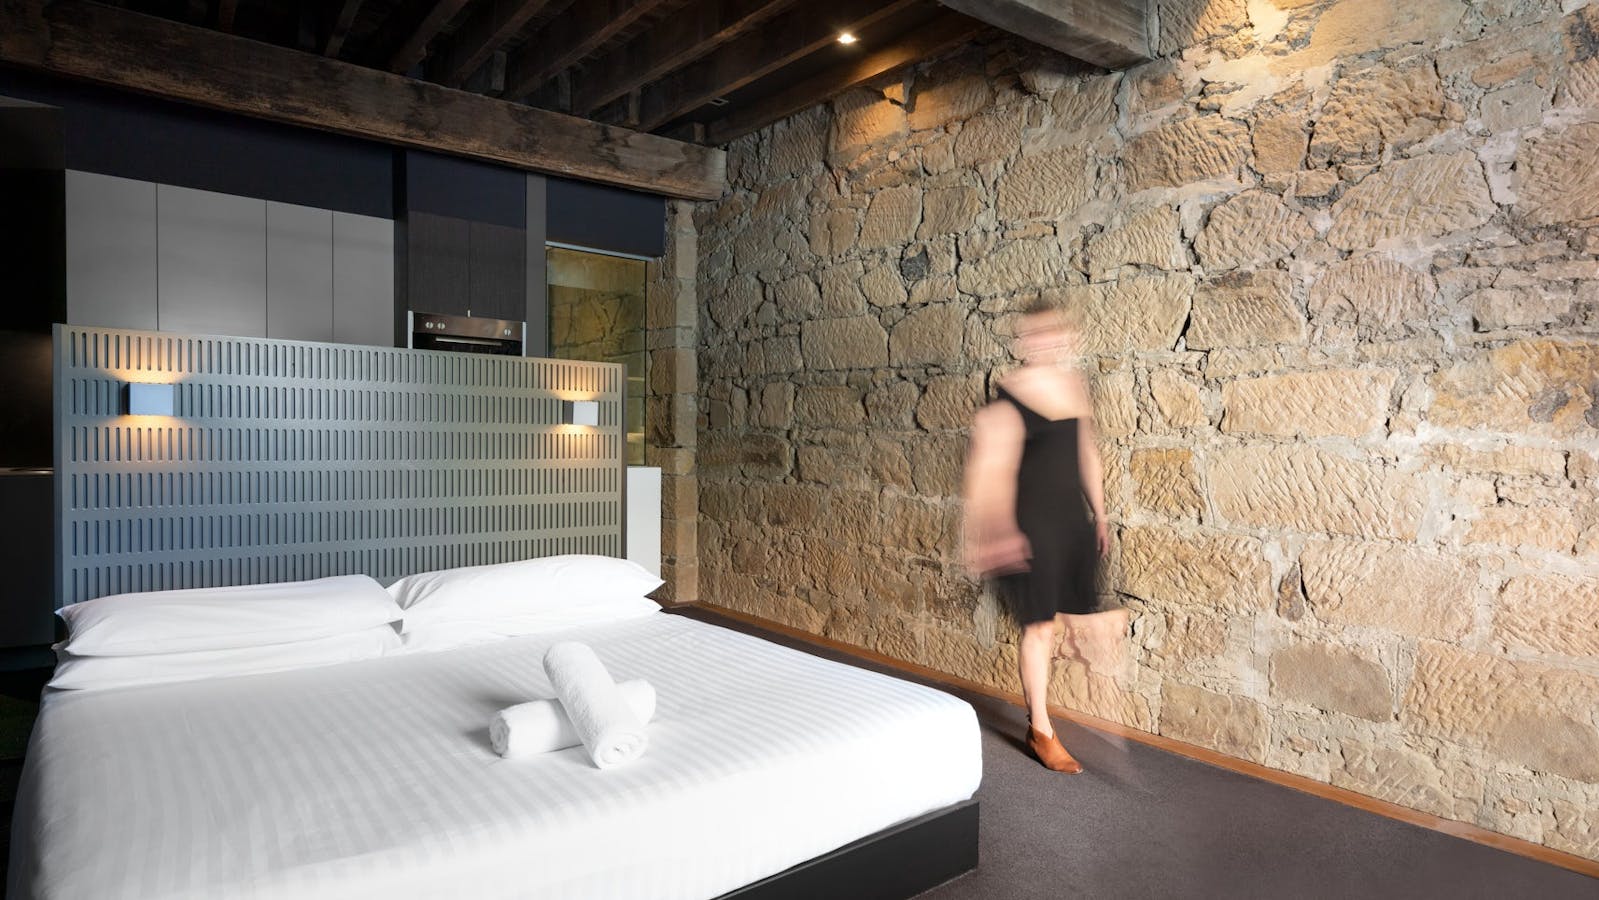 Warm sandstone walls and king bed comfort